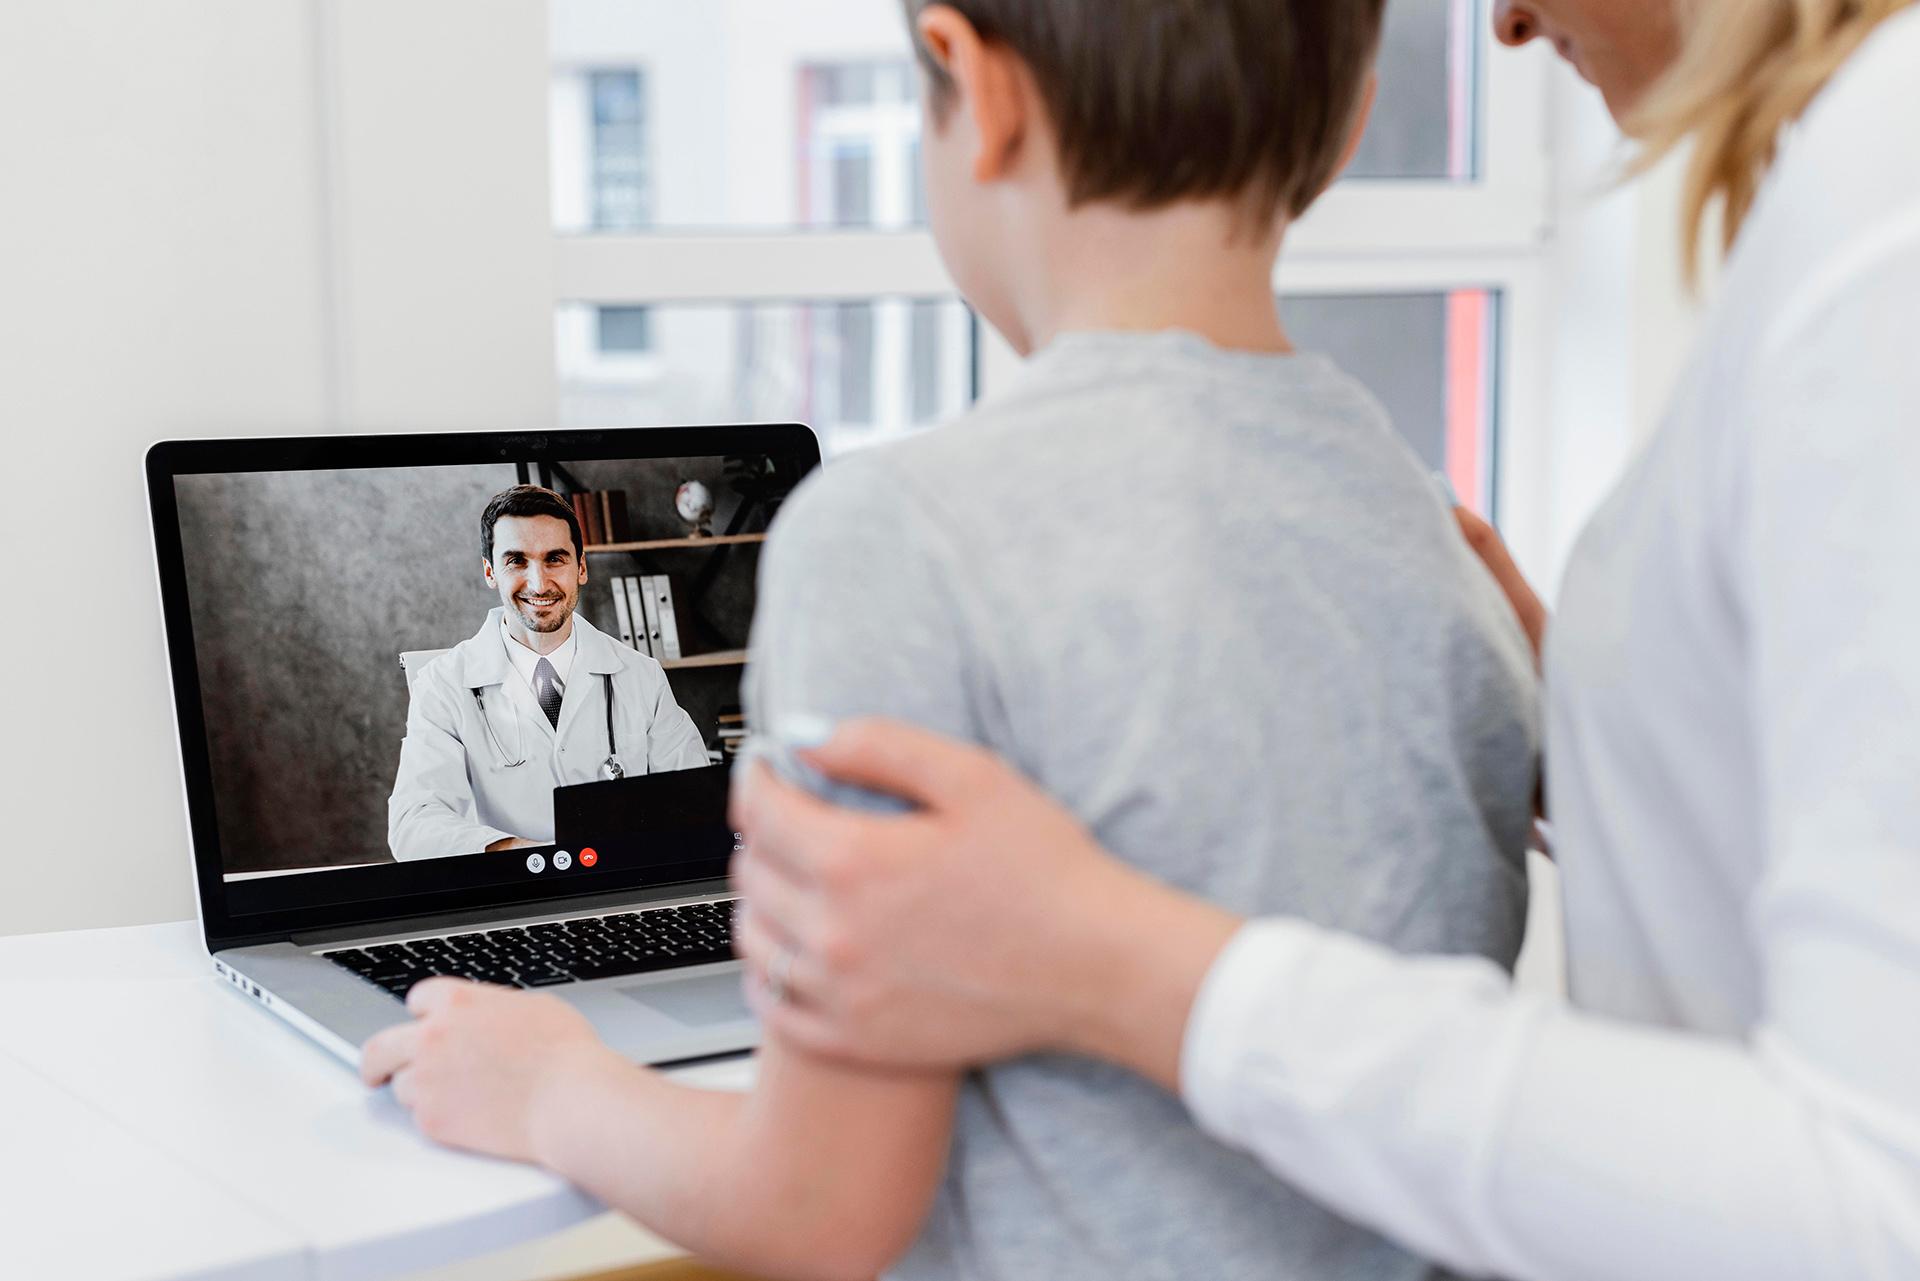 How Does Telemedicine Help You Receive Medical Treatment Remotely?